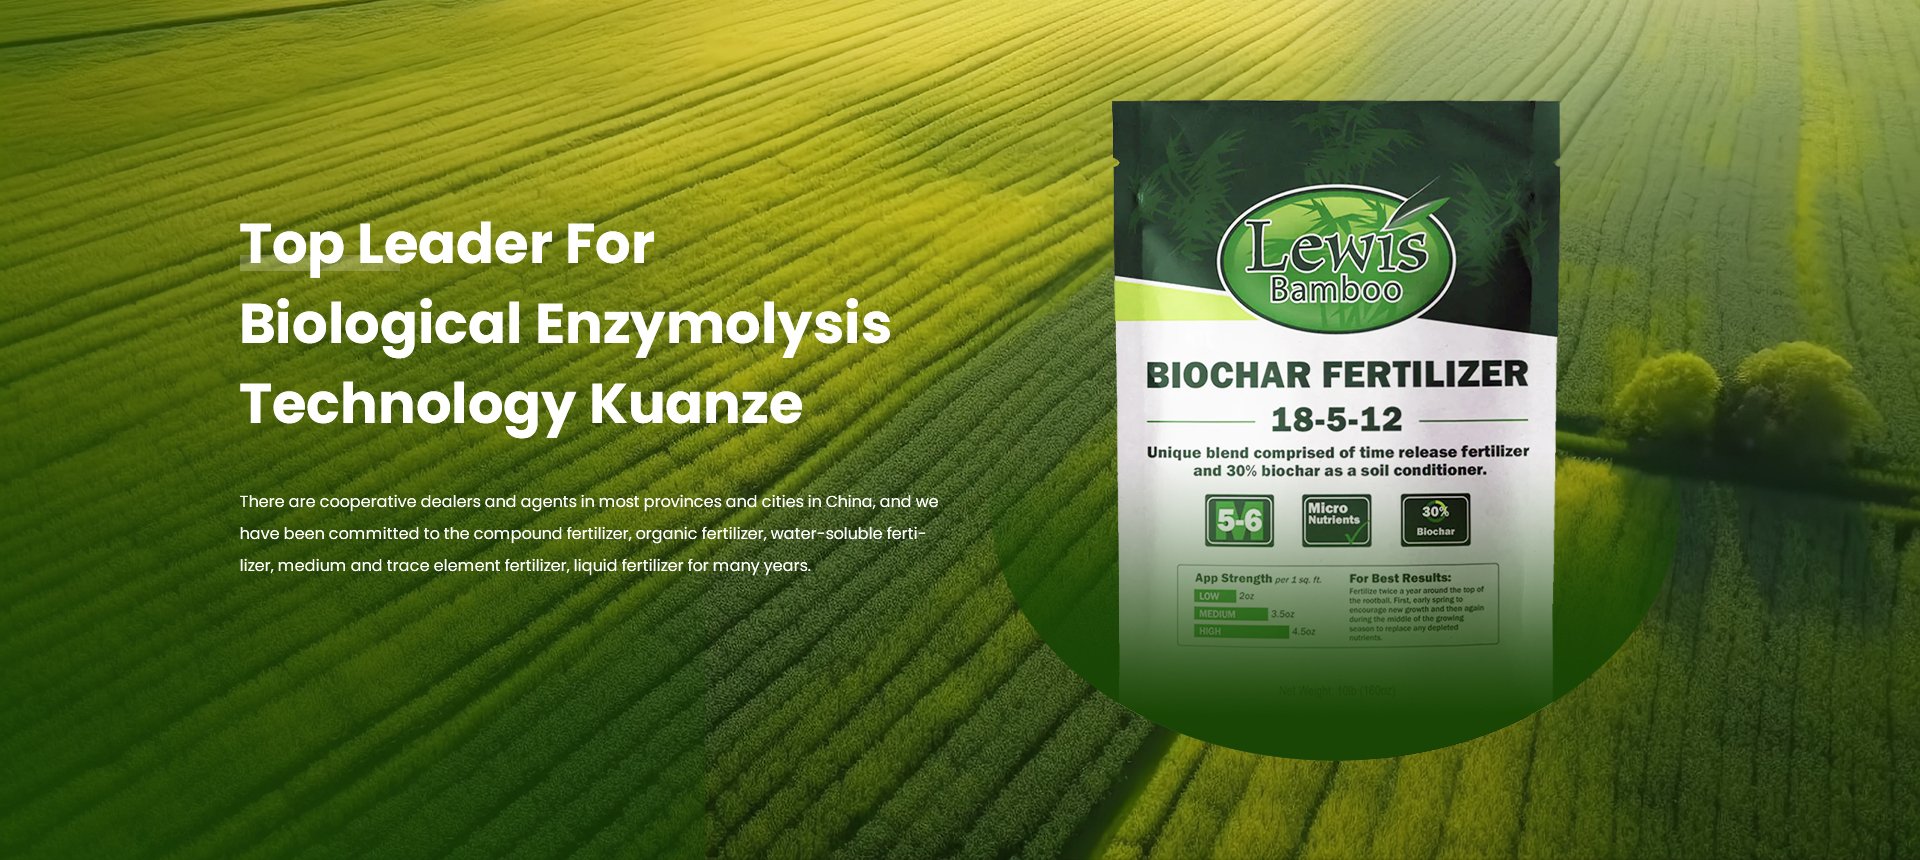 Top Leader For Biological Enzymolysis Technology Kuanze